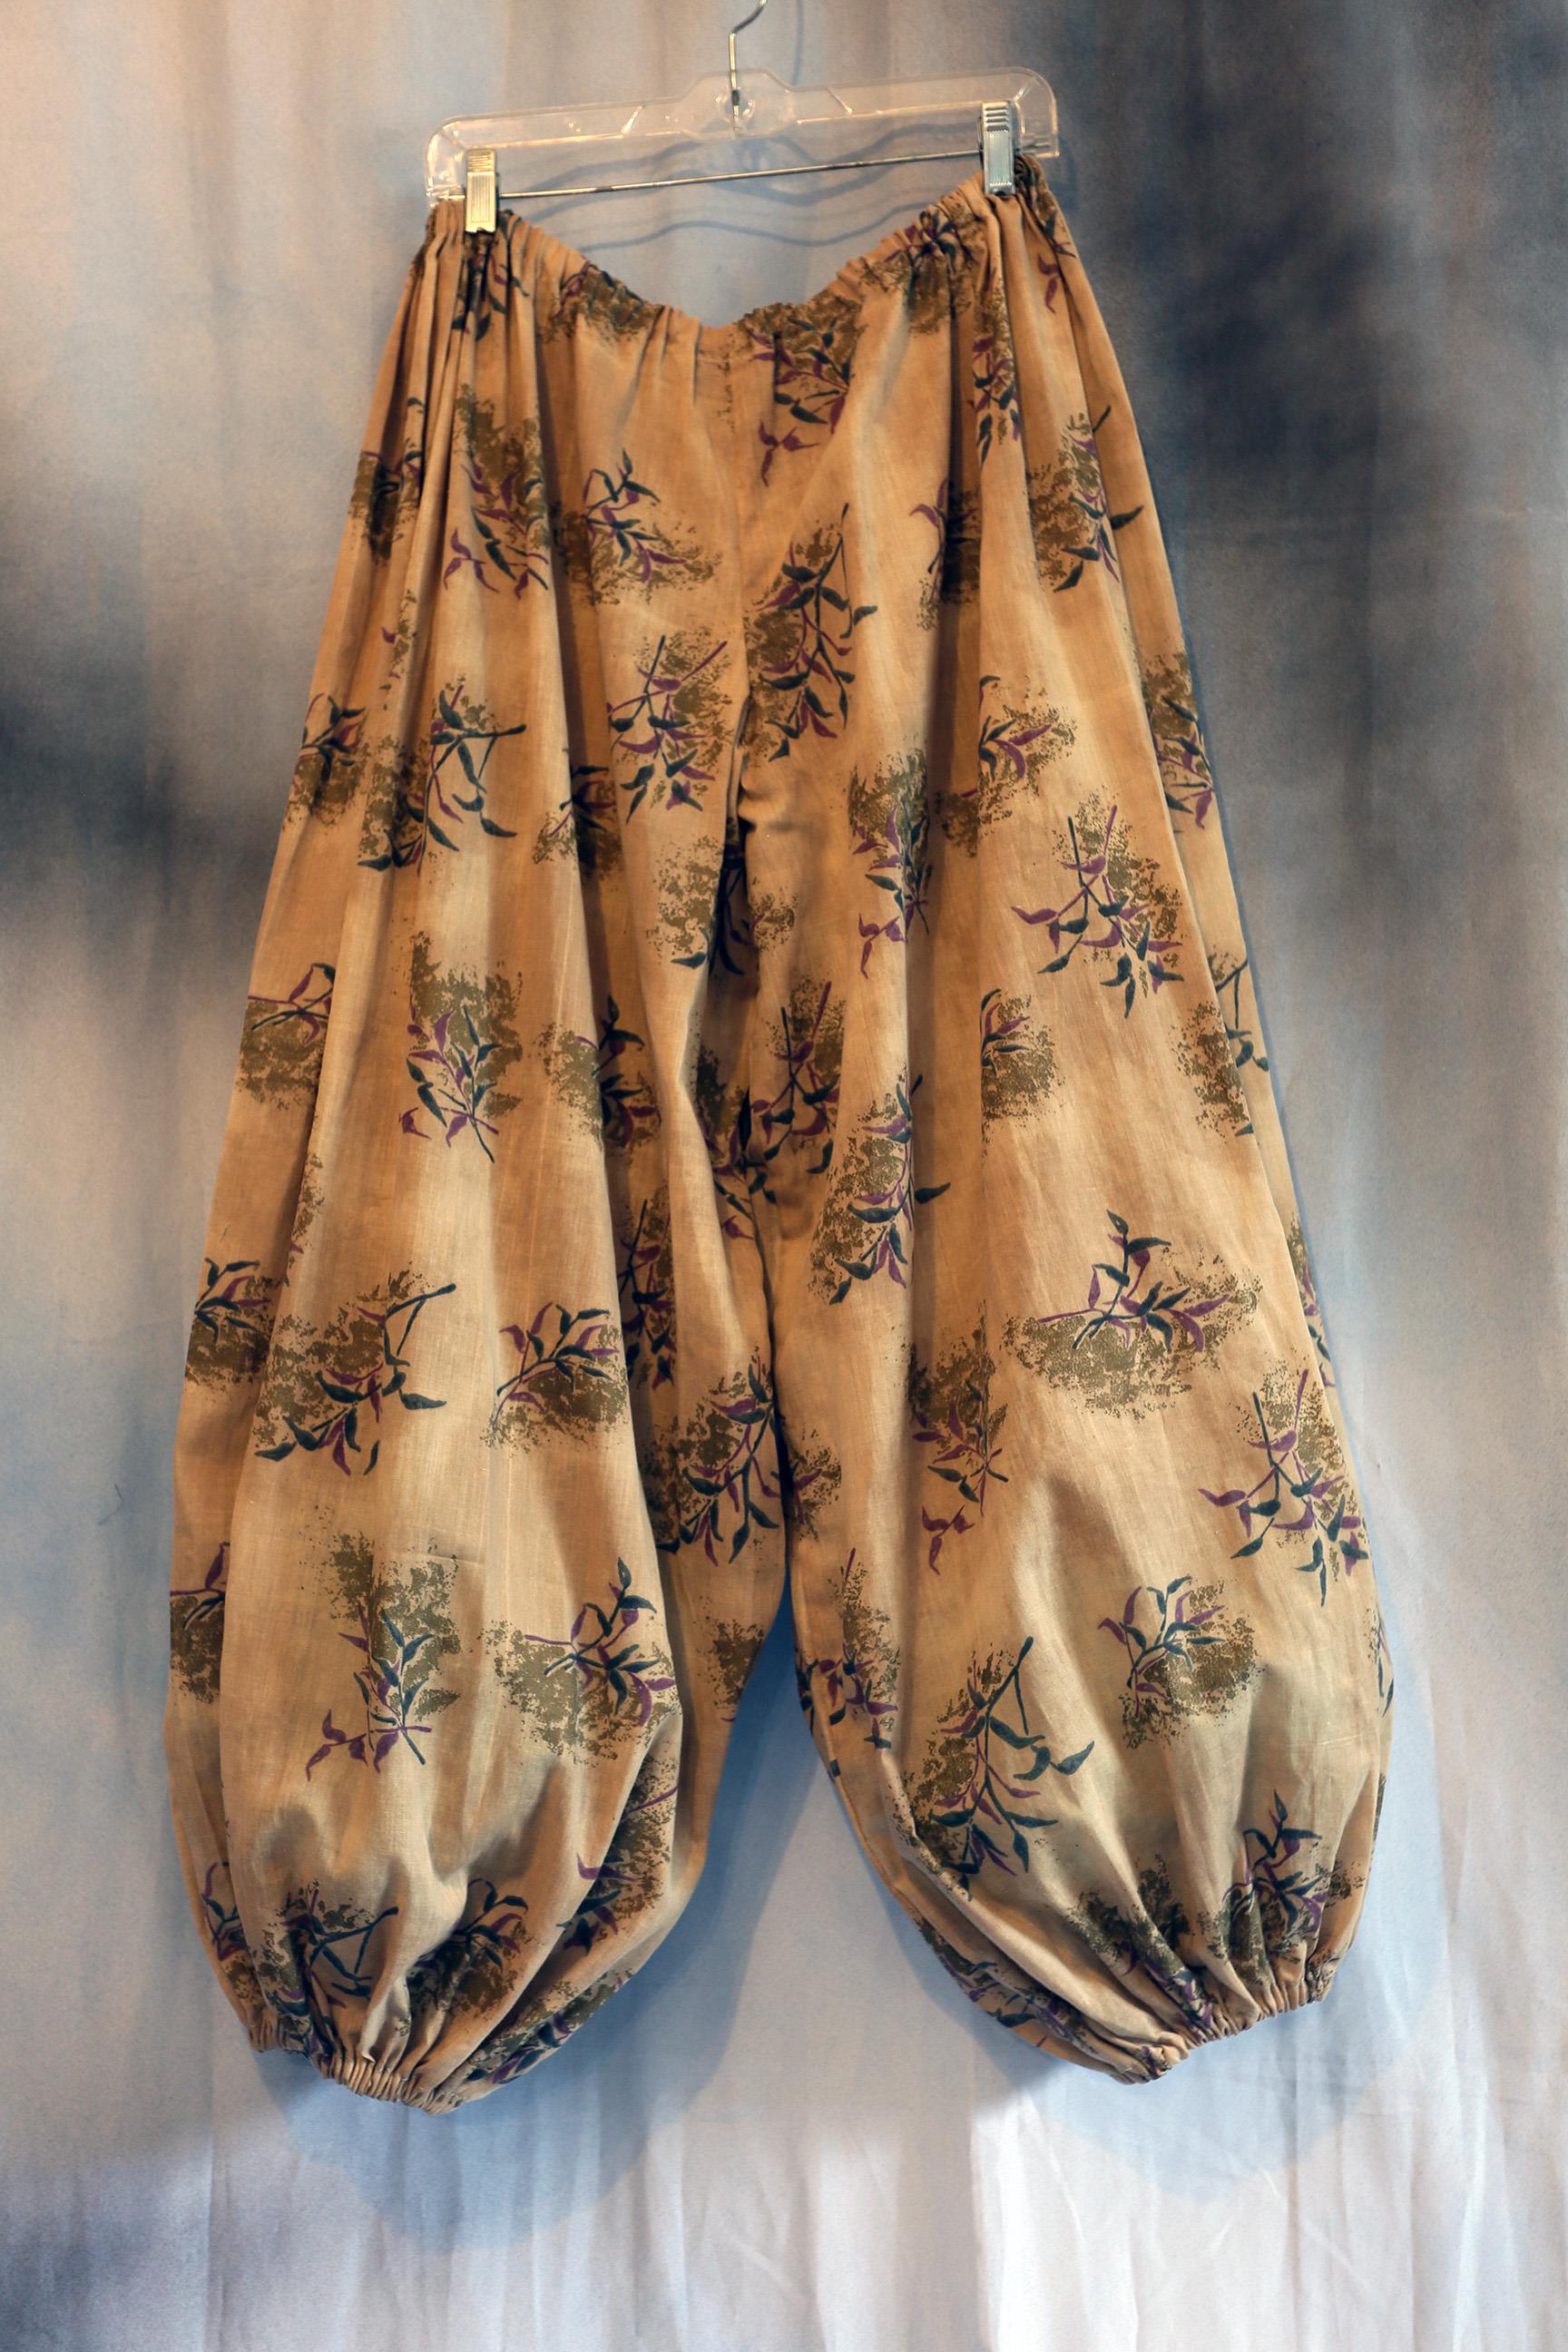 3 yards of soft brown woven fabric harem pants. The print is  a widely scattered brown leaf motif.